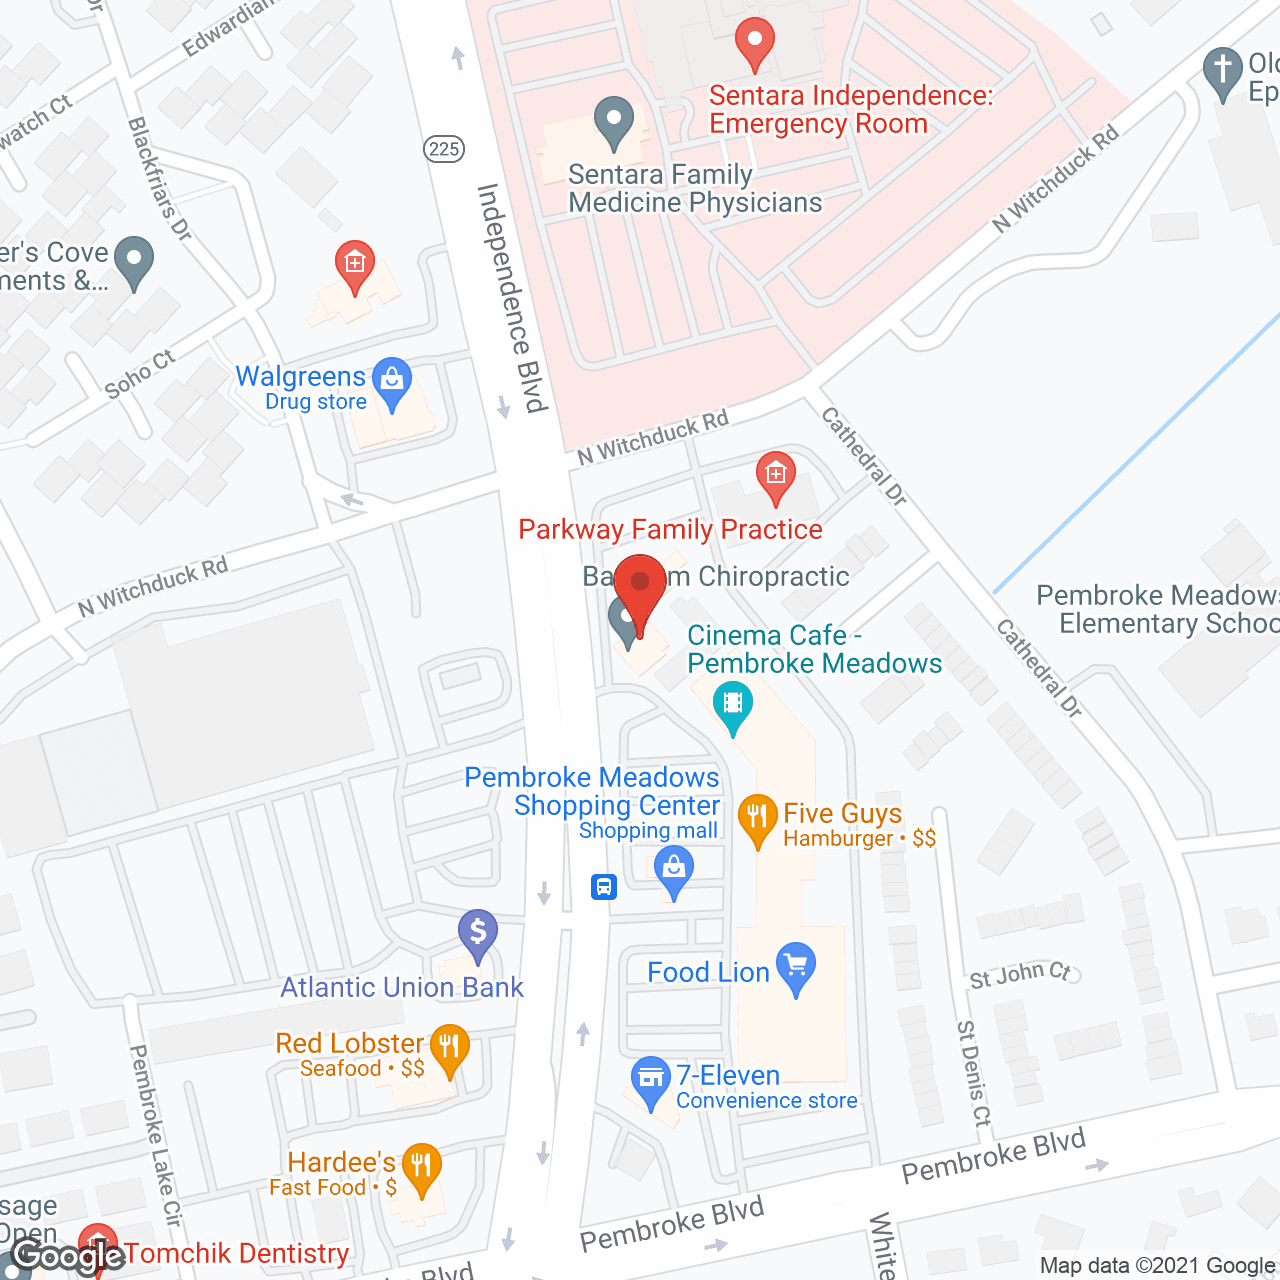 Arcadia Home Care & Staffing in google map